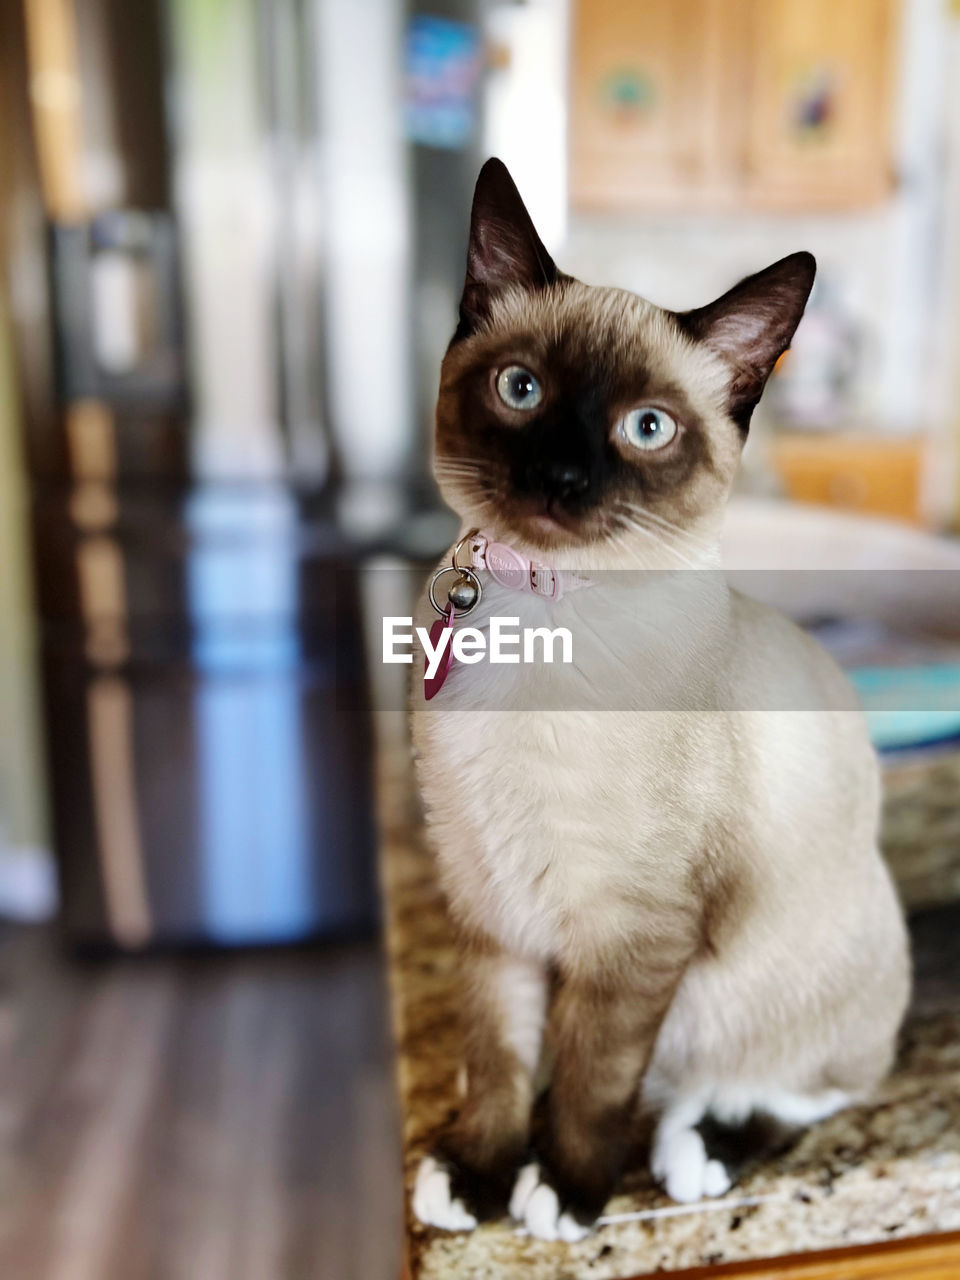 pet, cat, domestic animals, animal themes, animal, mammal, one animal, domestic cat, whiskers, feline, small to medium-sized cats, felidae, siamese, sitting, portrait, looking at camera, tonkinese, indoors, thai, no people, cute, focus on foreground, looking, animal hair, young animal, eye, kitten